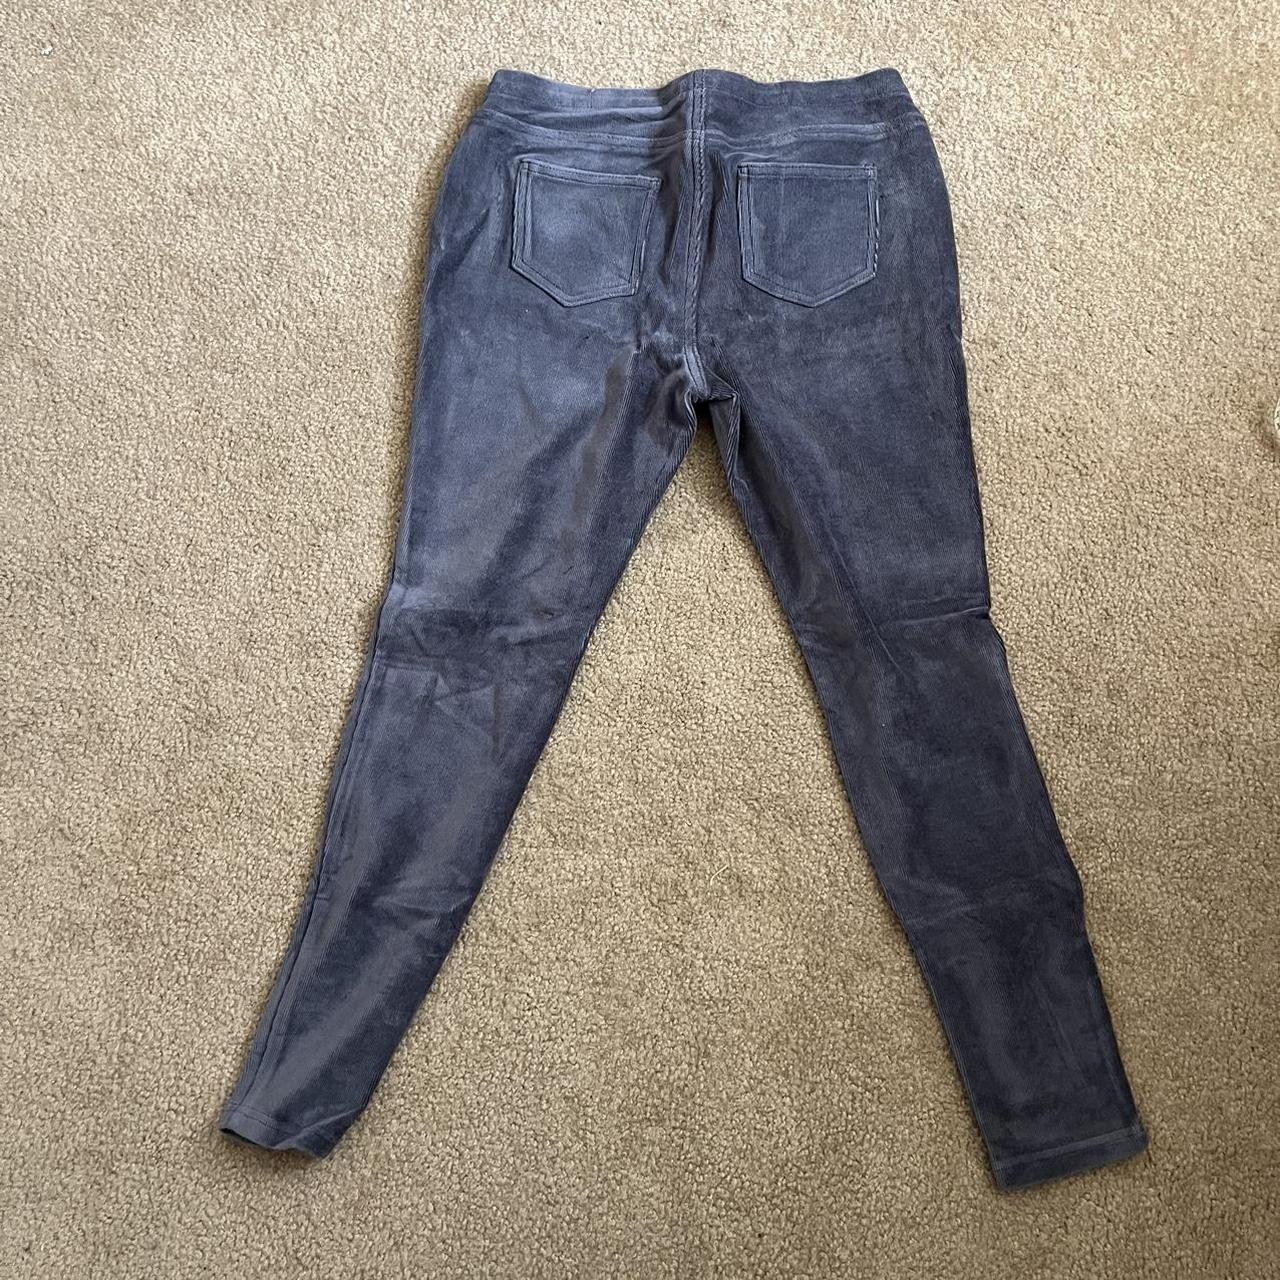 grey corduroy high waisted leggings from faded glory - Depop